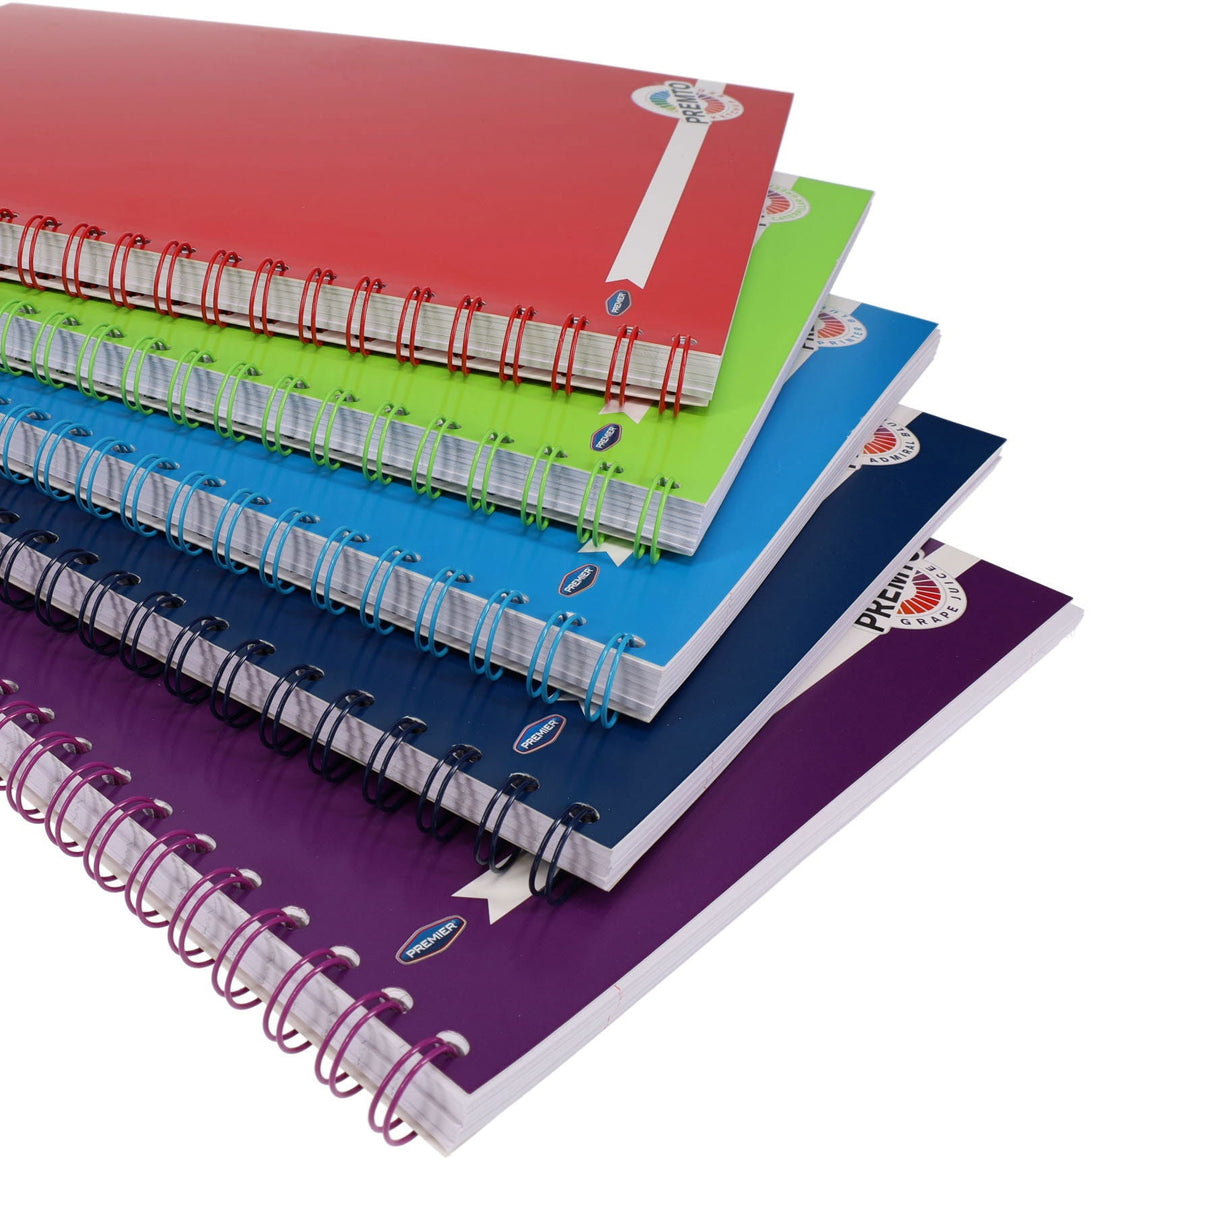 Premto A4 Wiro Notebook - 200 Pages - Caterpillar Green-A4 Notebooks- Buy Online at Stationery Shop UK